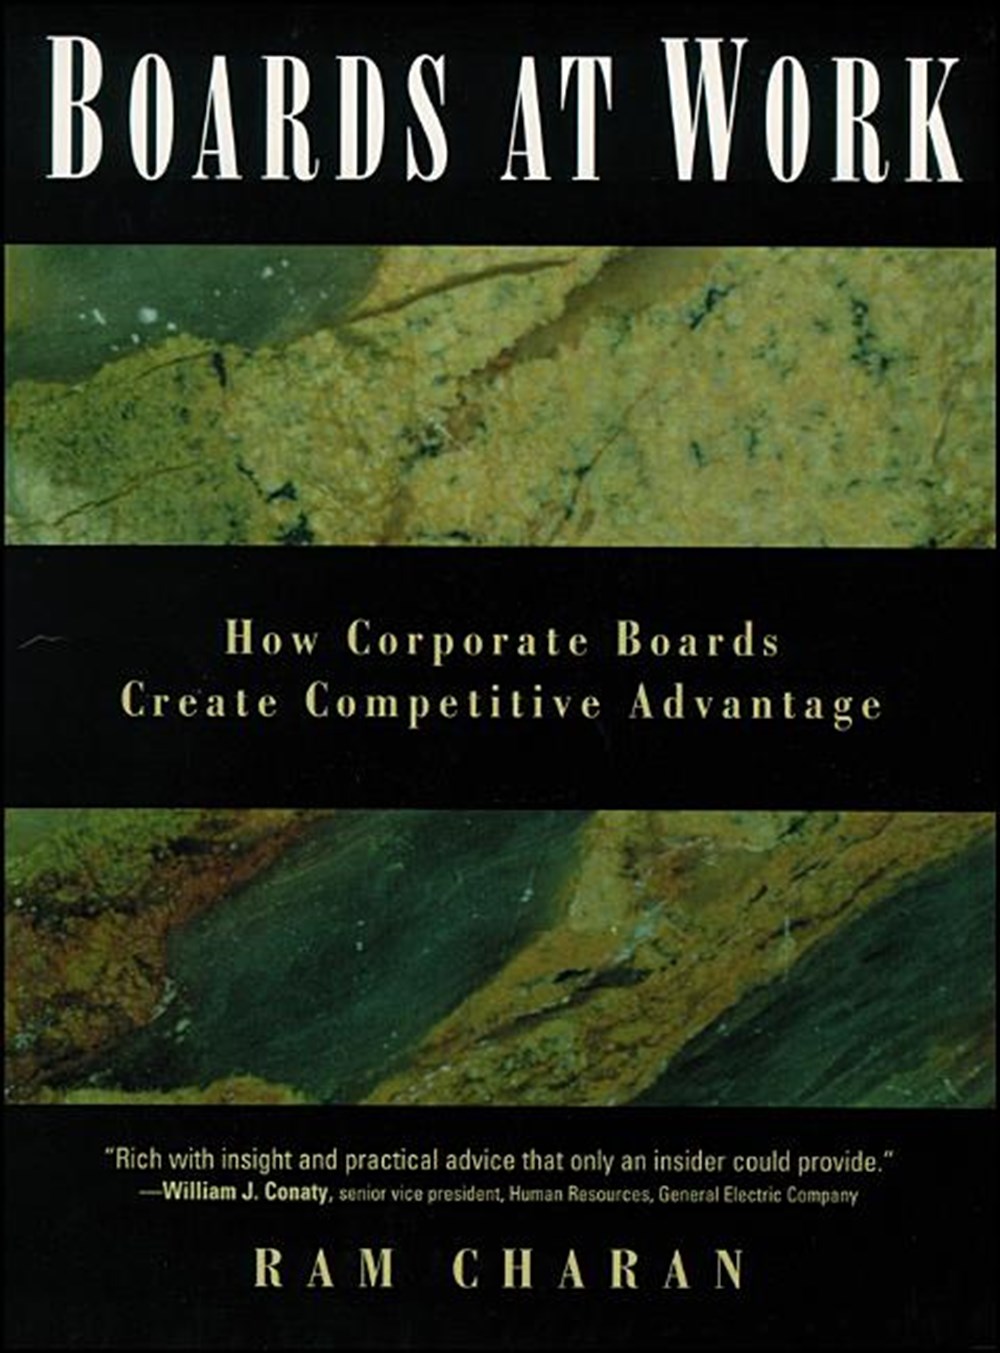 Boards at Work: How Corporate Boards Create Competitive Advantage